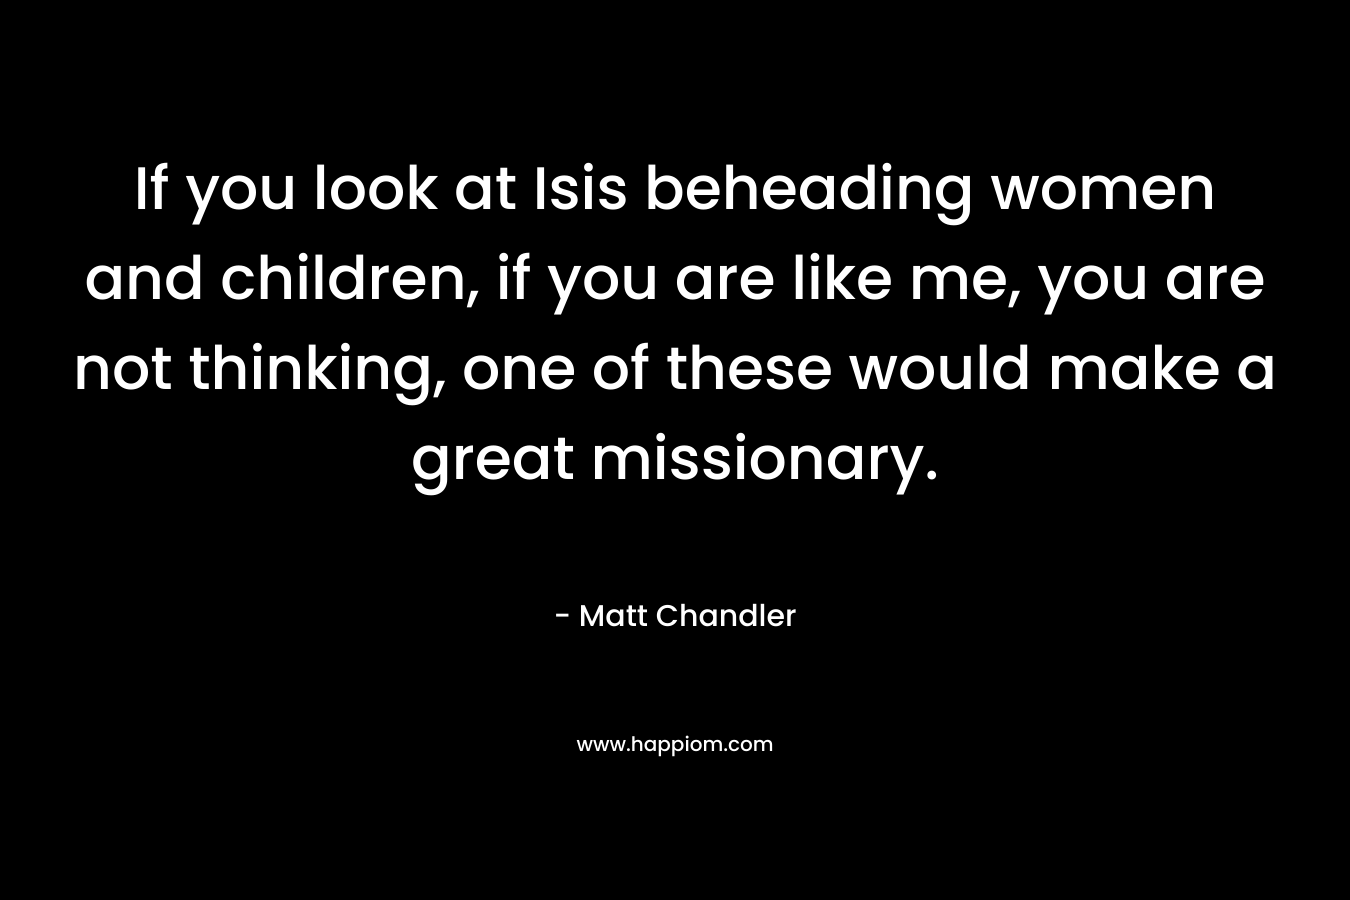 If you look at Isis beheading women and children, if you are like me, you are not thinking, one of these would make a great missionary.